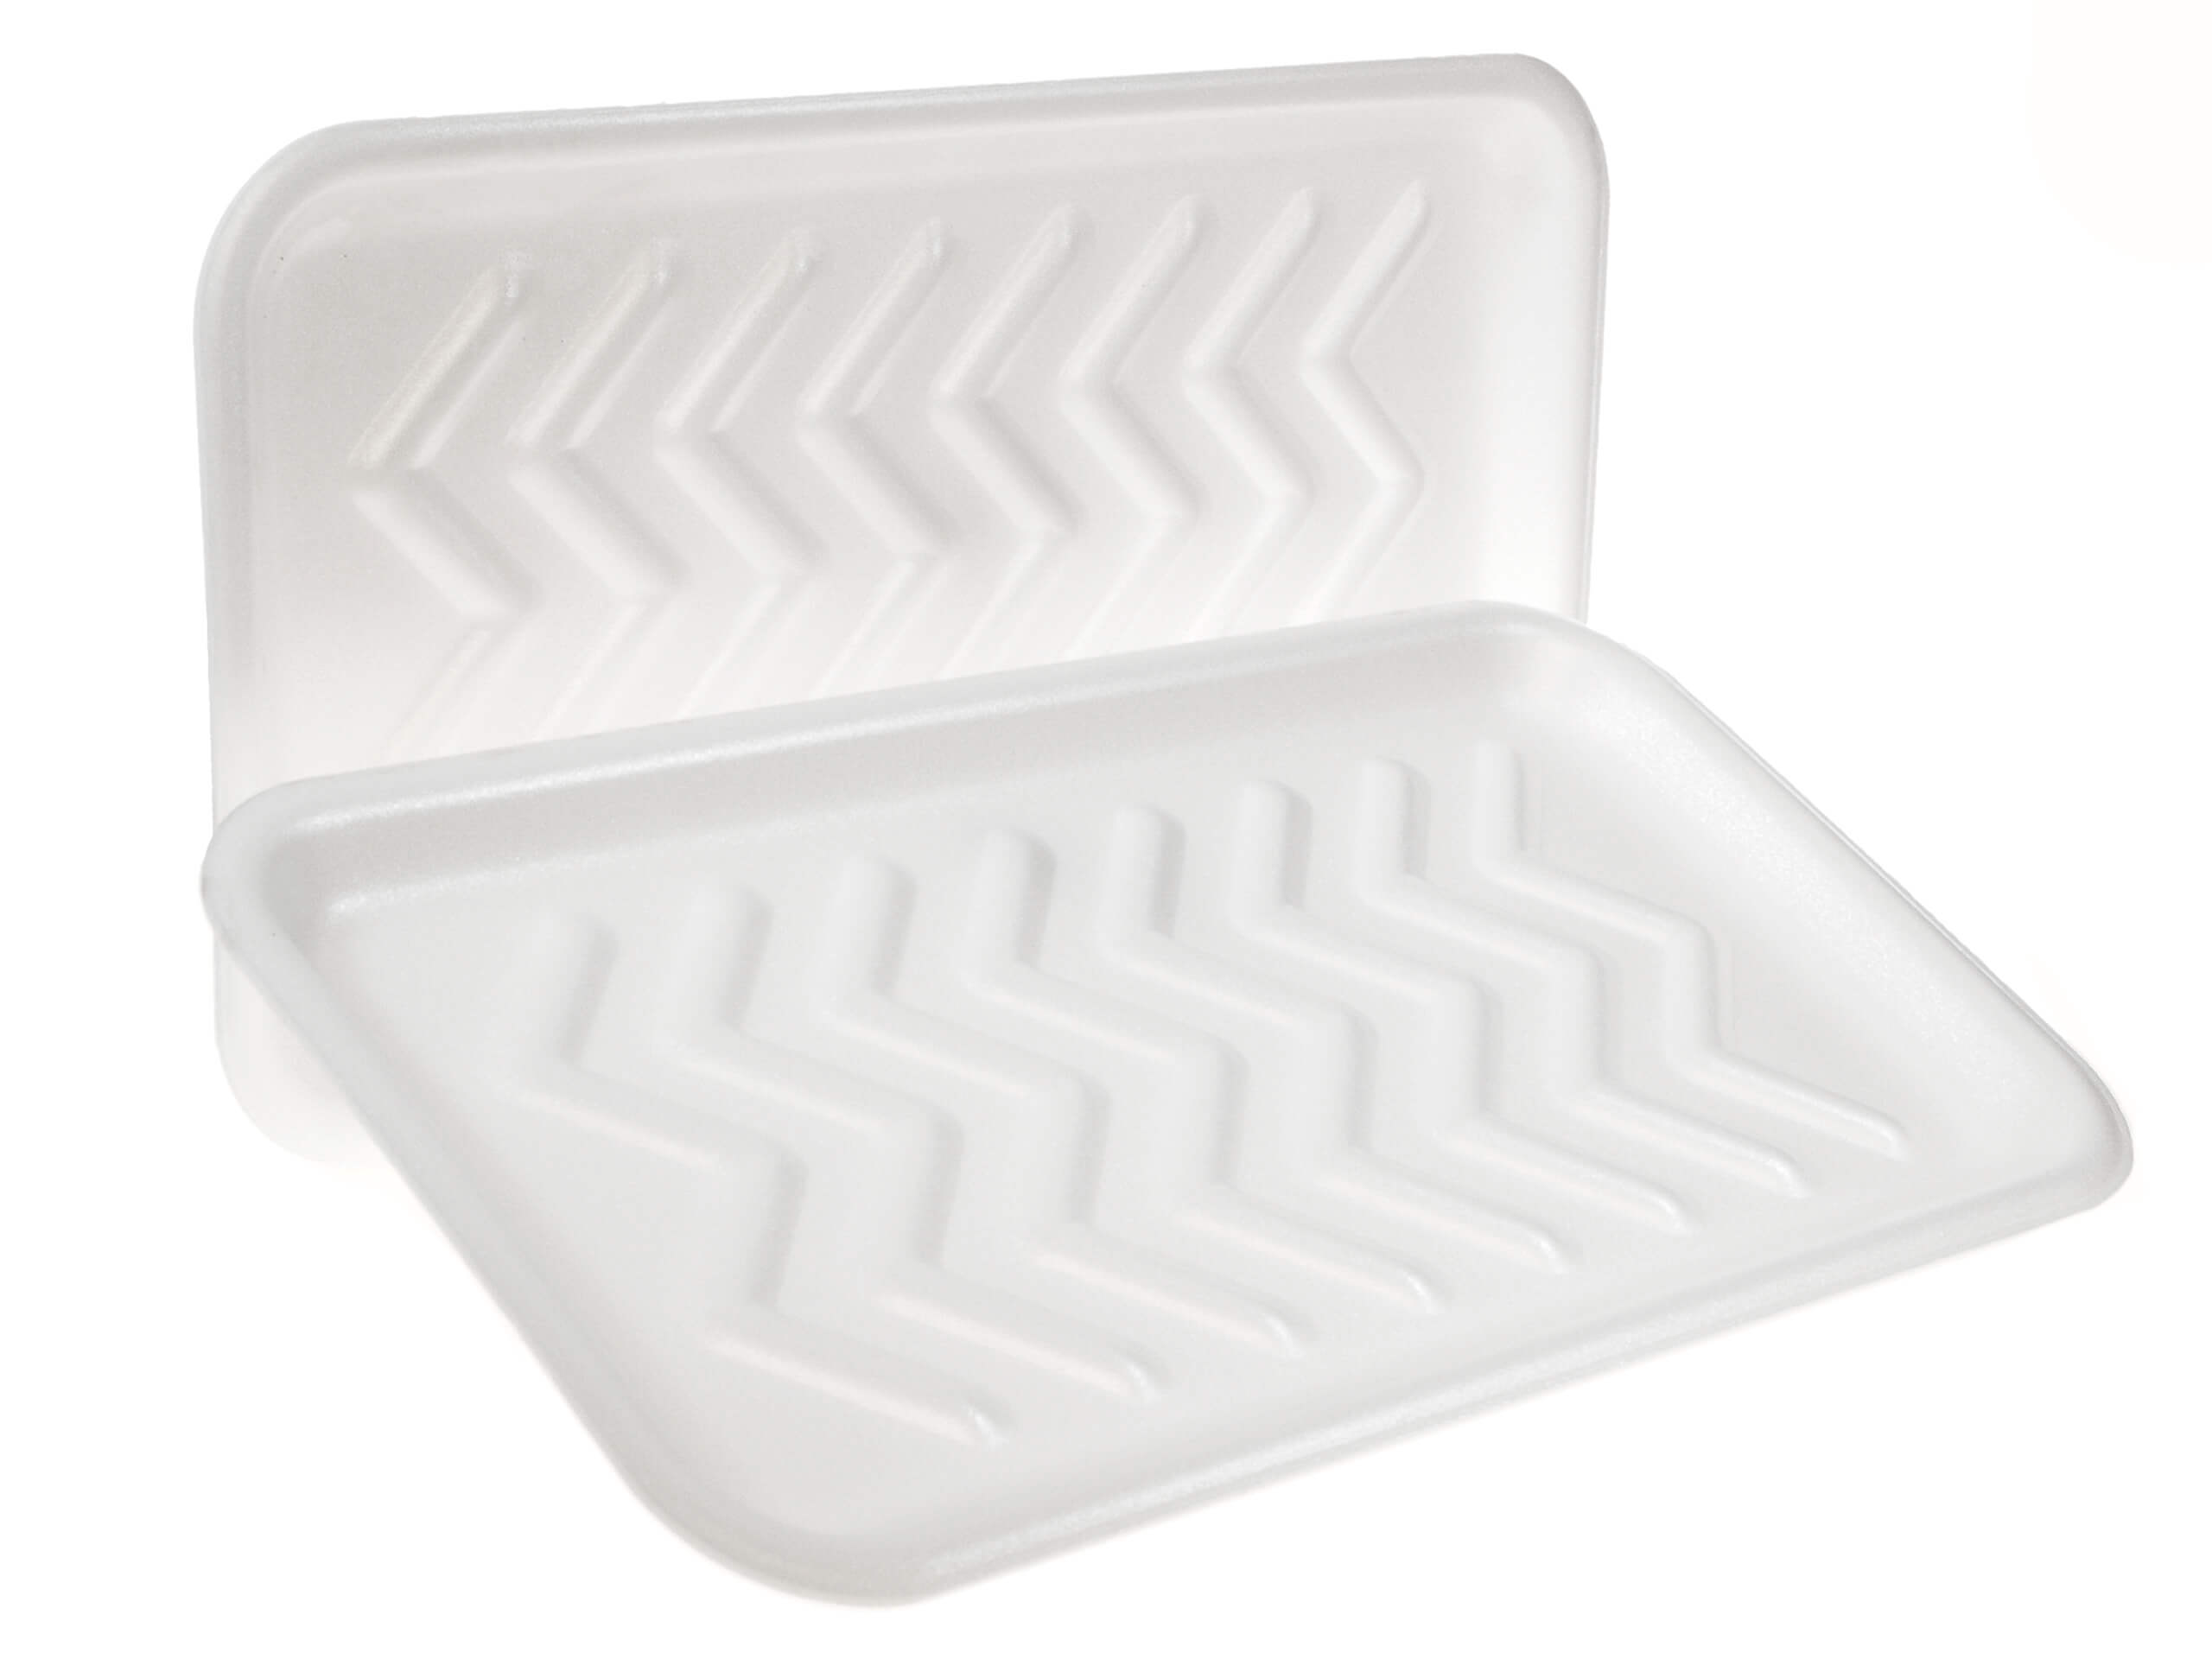 CKF 12SWH, 12S White Foam Meat Trays, Disposable